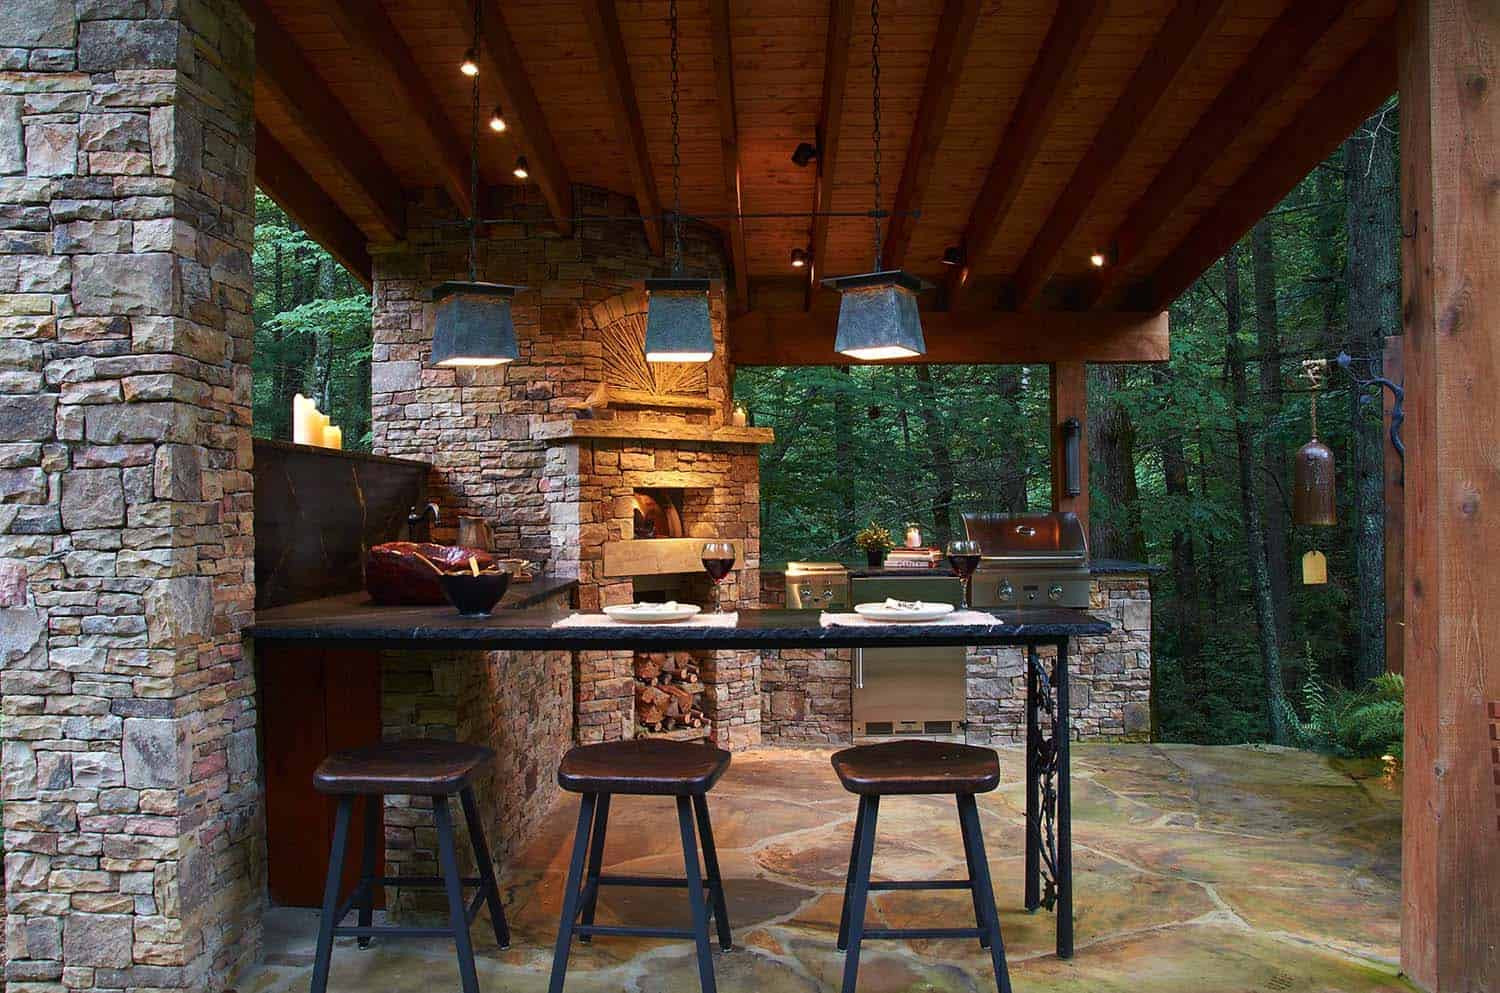 Outdoor Kitchen And Bars
 20 Spectacular outdoor kitchens with bars for entertaining